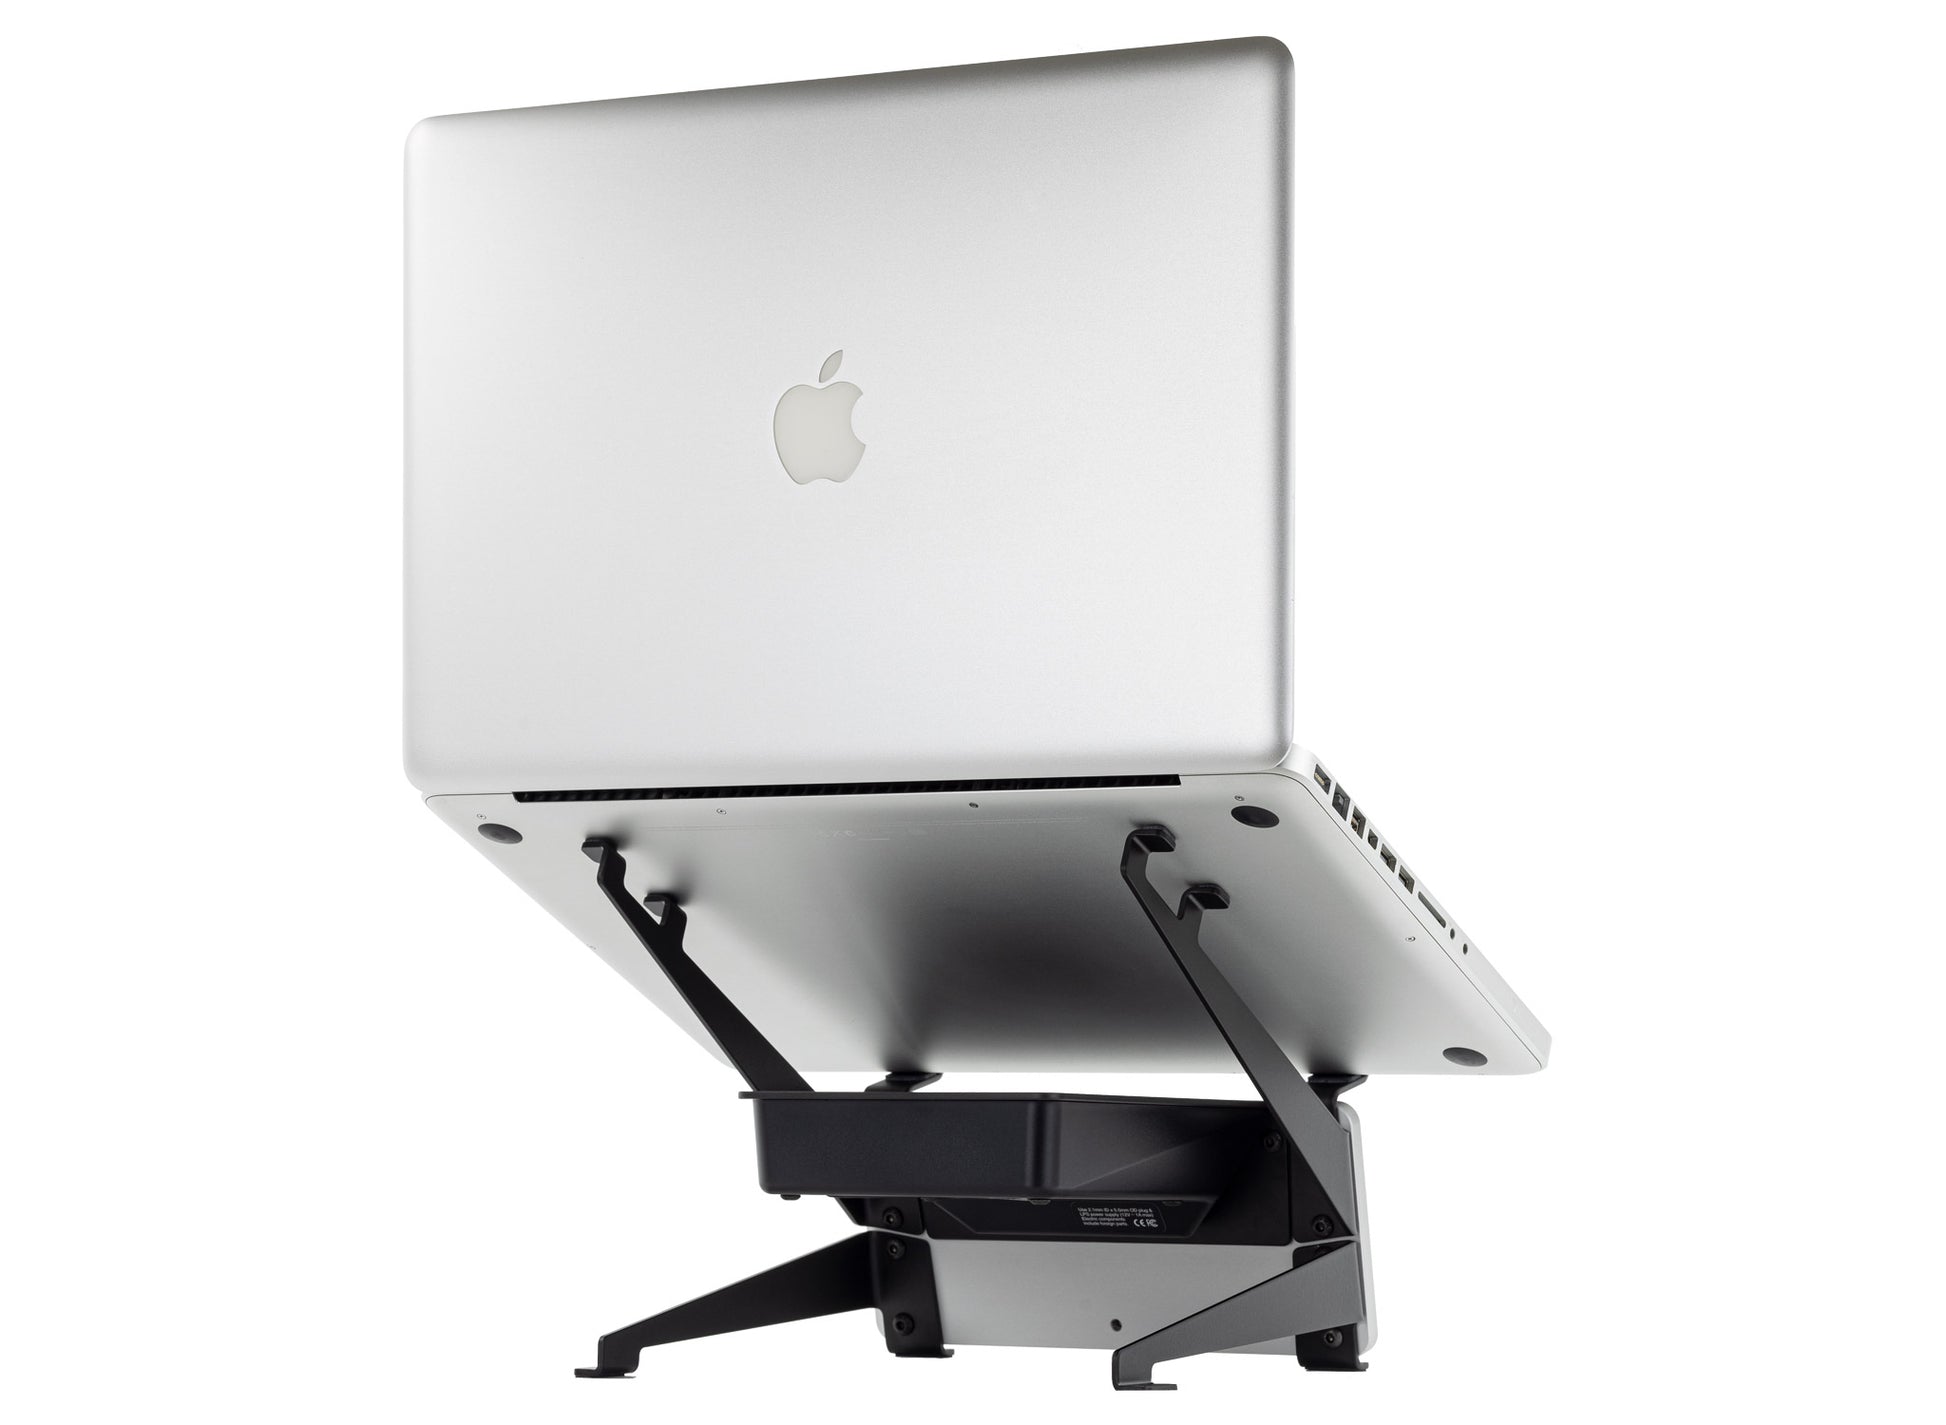 SVALT Cooling Stand model SRxB14 silver back side view for quiet fan cooling performance with Apple laptop MacBook Pro